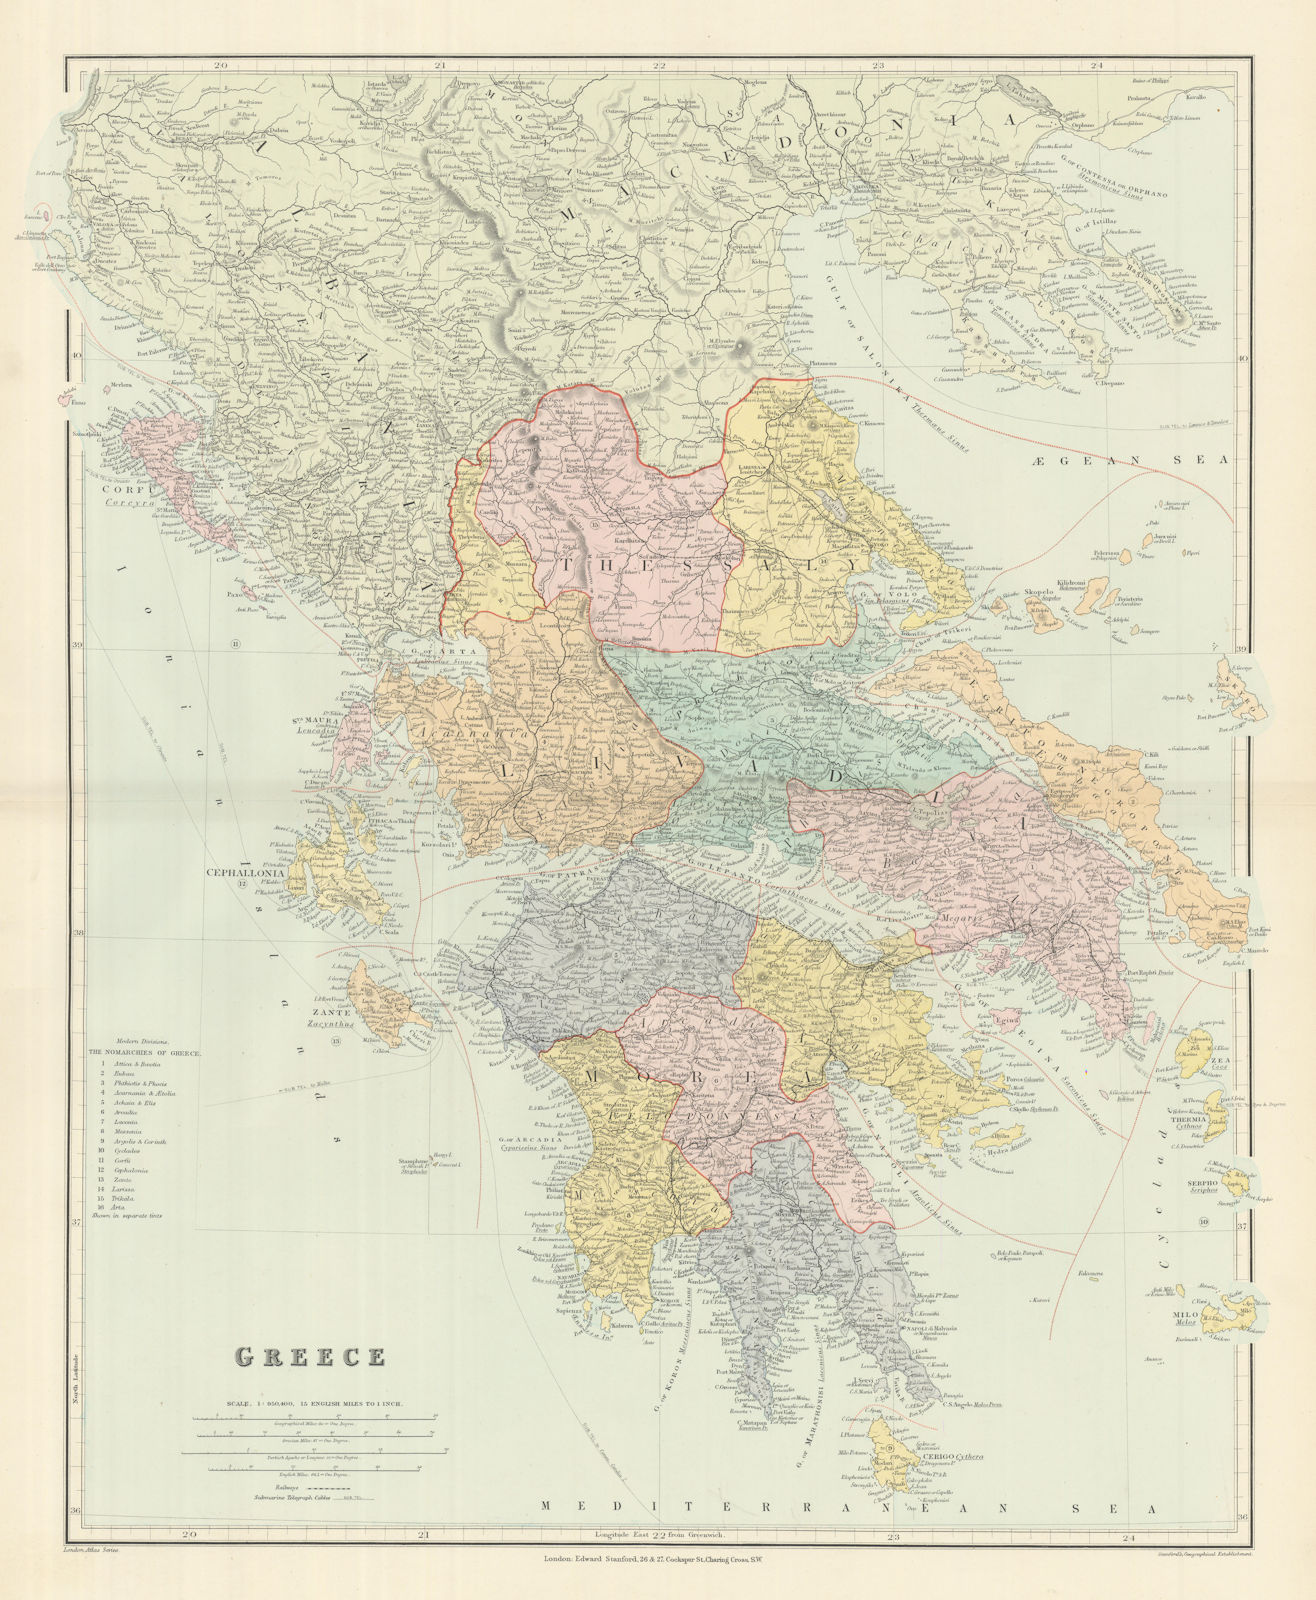 Associate Product Greece. Nomarchies. Ionian Sporades Cyclades Morea Livadia. STANFORD 1894 map